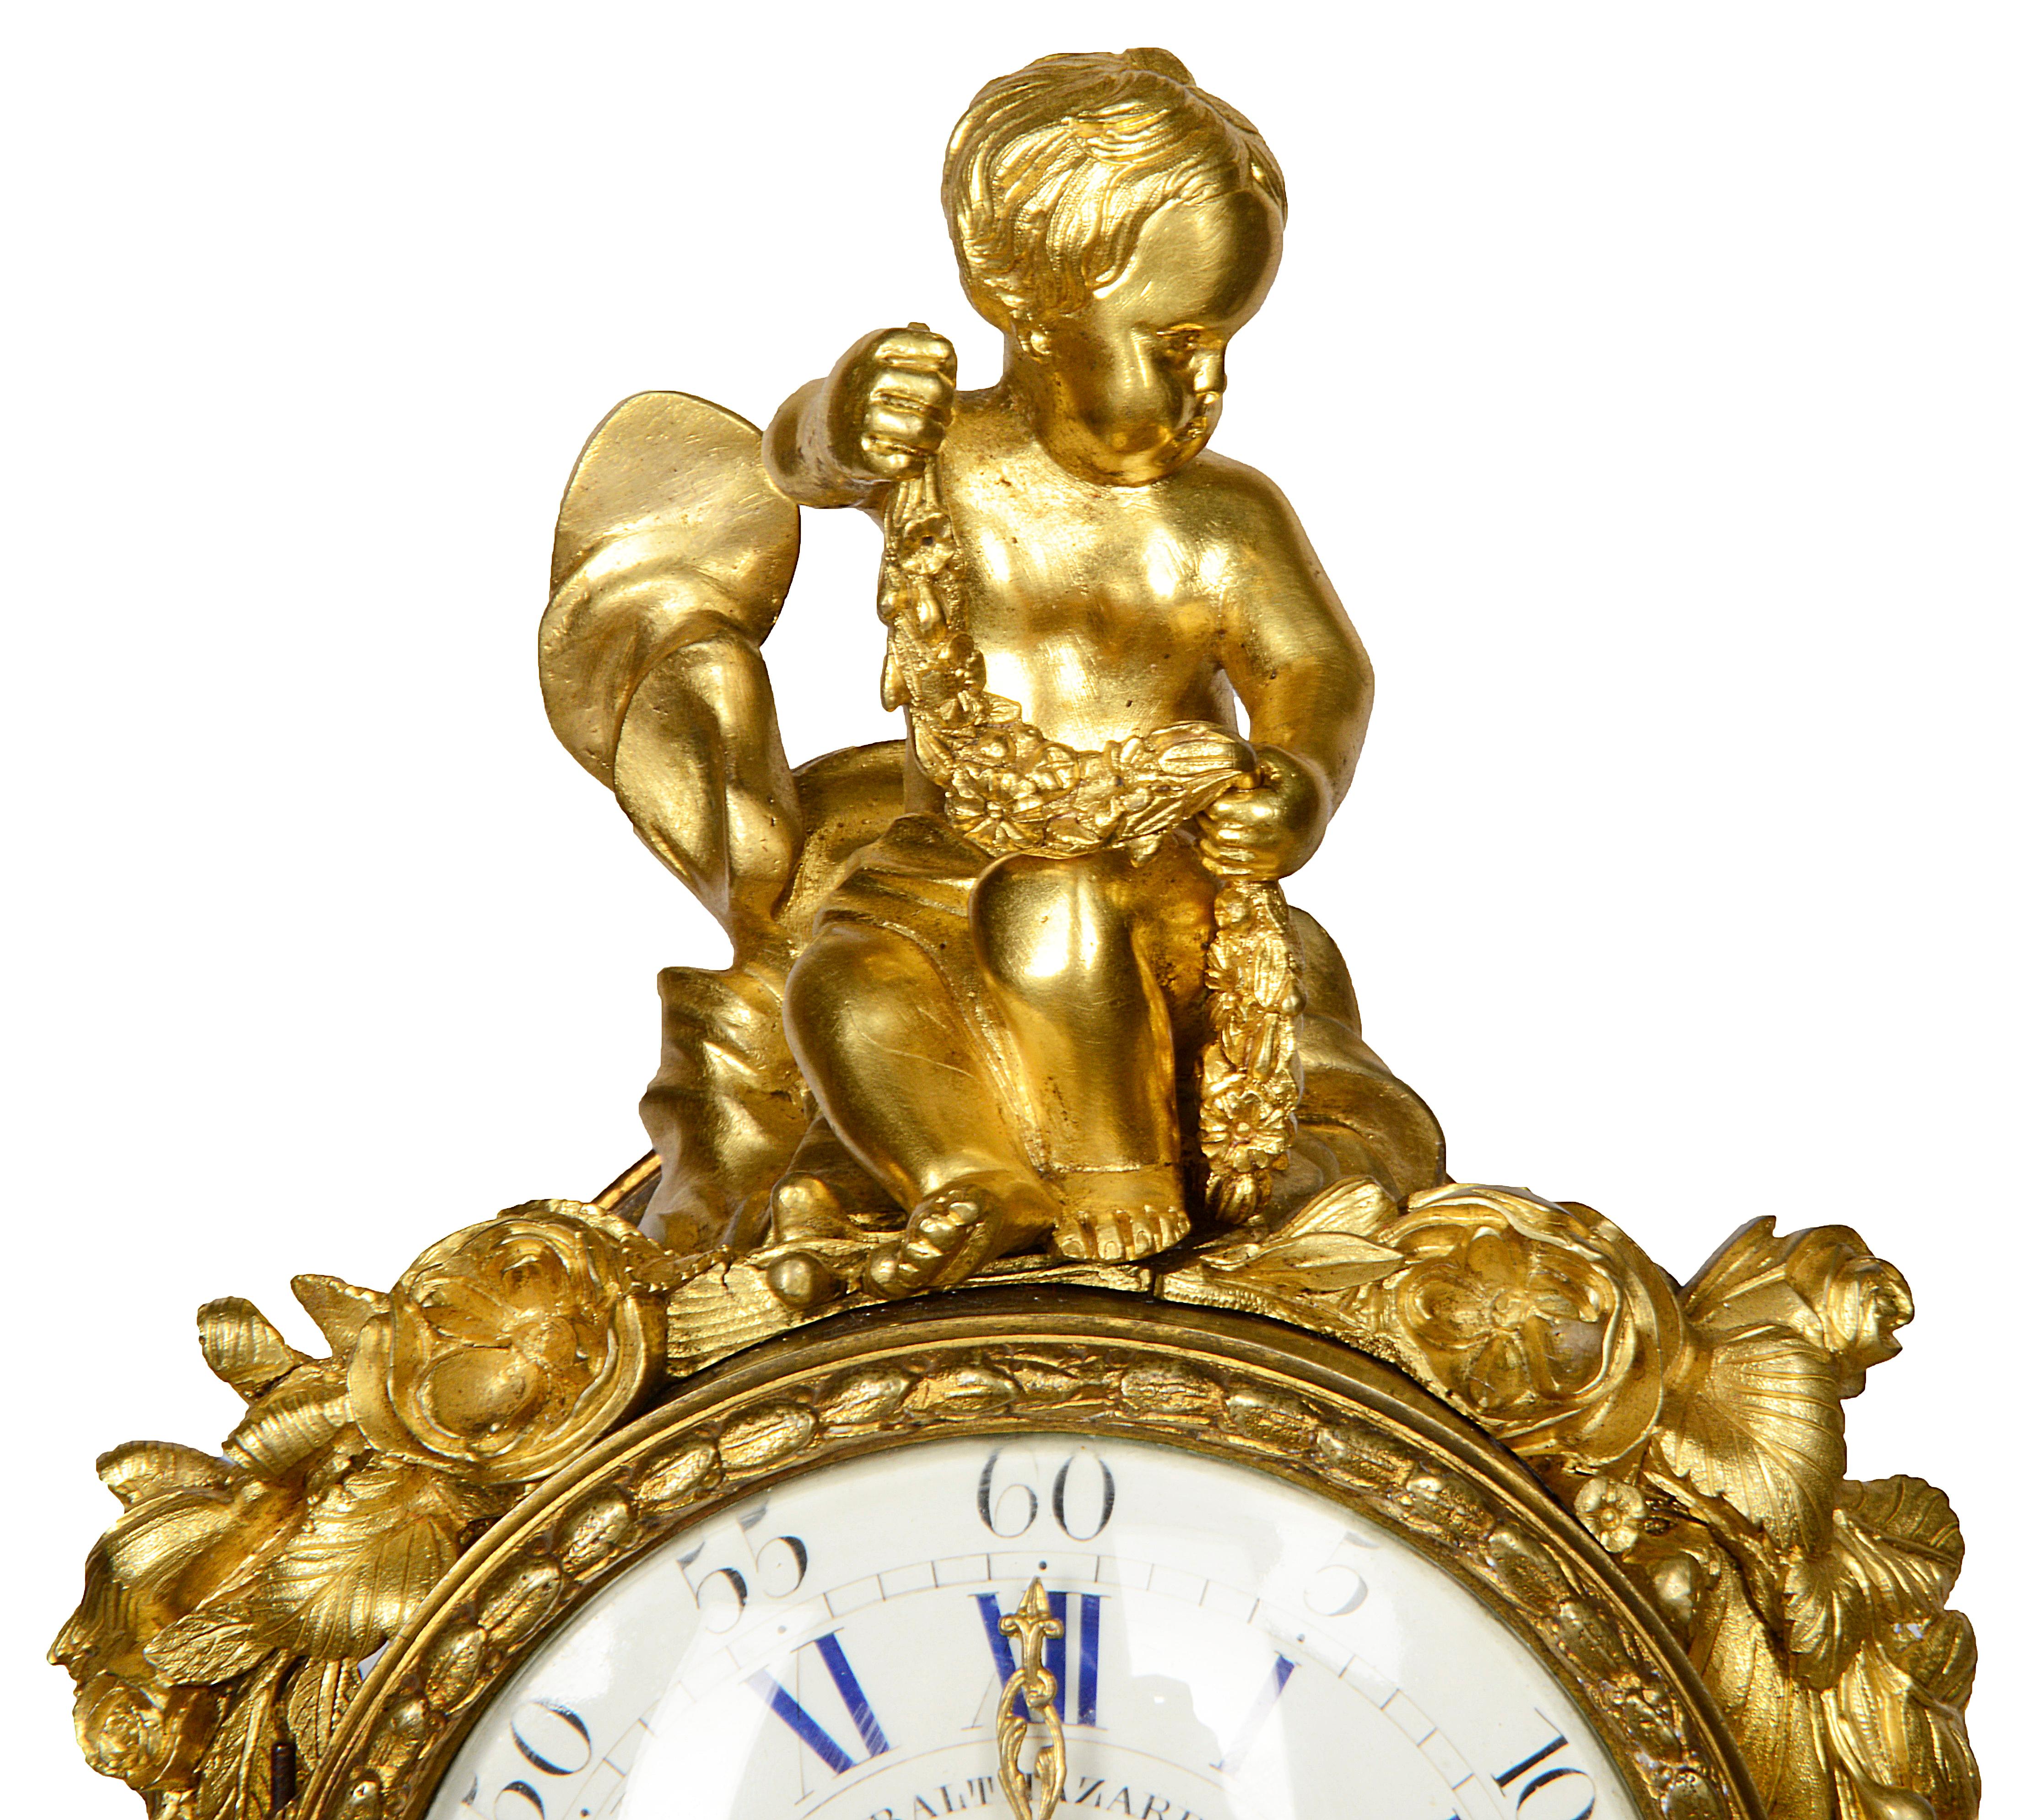 A wonderful French 19th century gilded ormolu mantel clock, having a putti mounted to the top holding garlands of flowers, draping down the case, Rams heads and urns of flowers. The turquoise Sevres style porcelain plaques depicting classical and